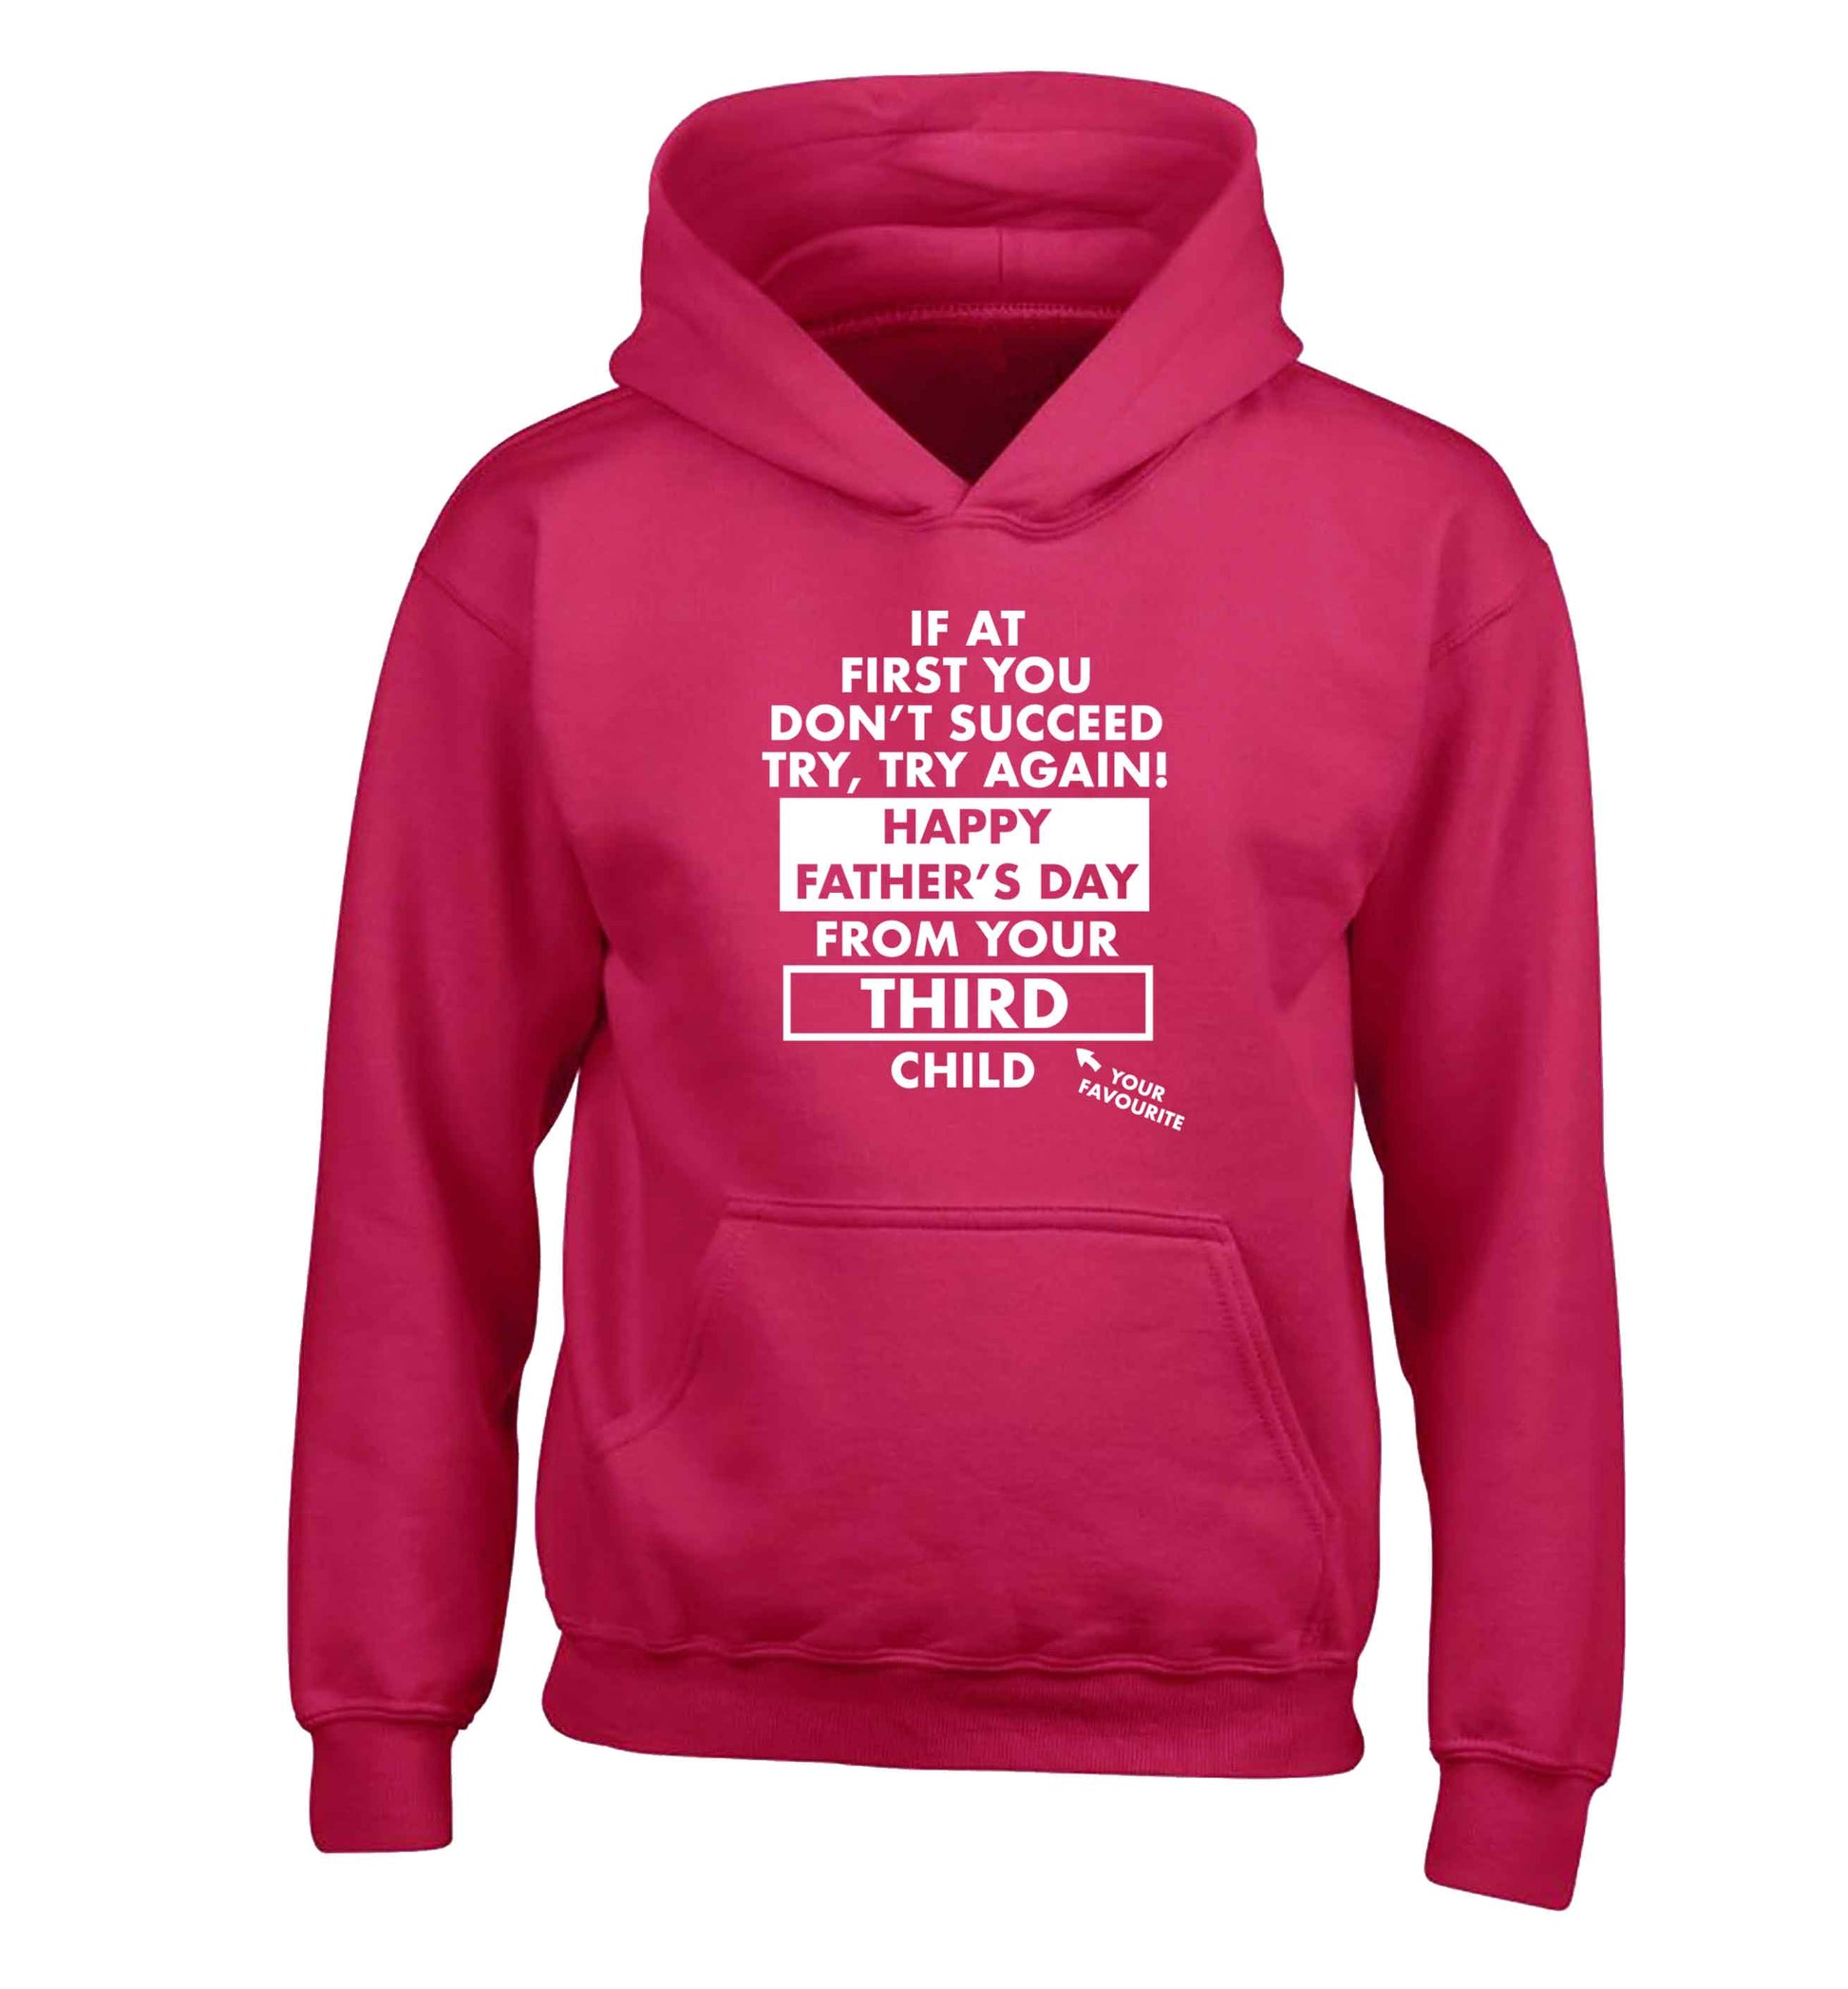 If at first you don't succeed try, try again Happy Father's day from your third child! children's pink hoodie 12-13 Years